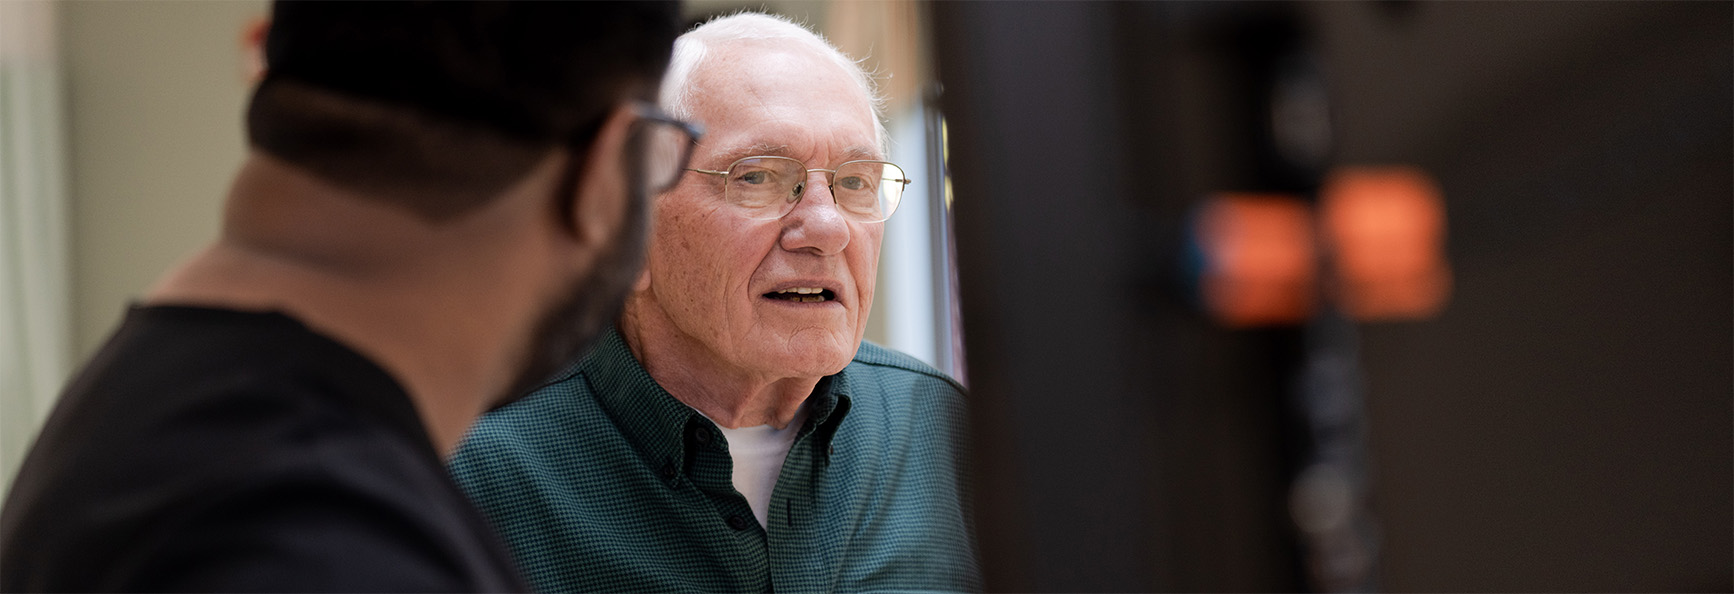 Older male patient interacting with clinical staff